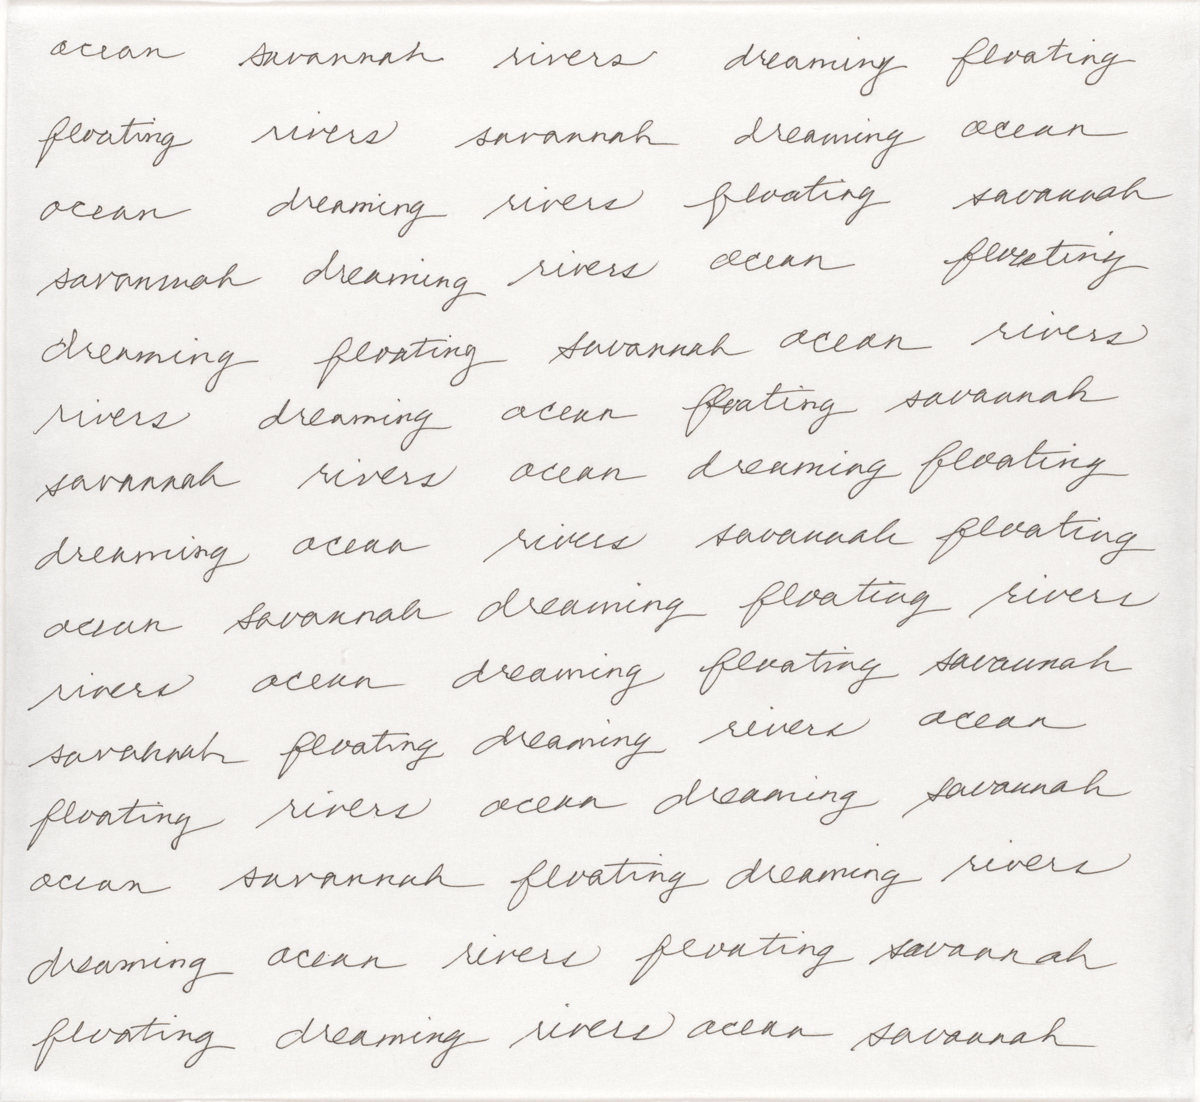 Maren Hassinger, Ocean Savannah Rivers Dreaming Floating, 2007. Ink on paper. Framed: 14 ¼ x 13 ¼ x 1 ¼ inches.